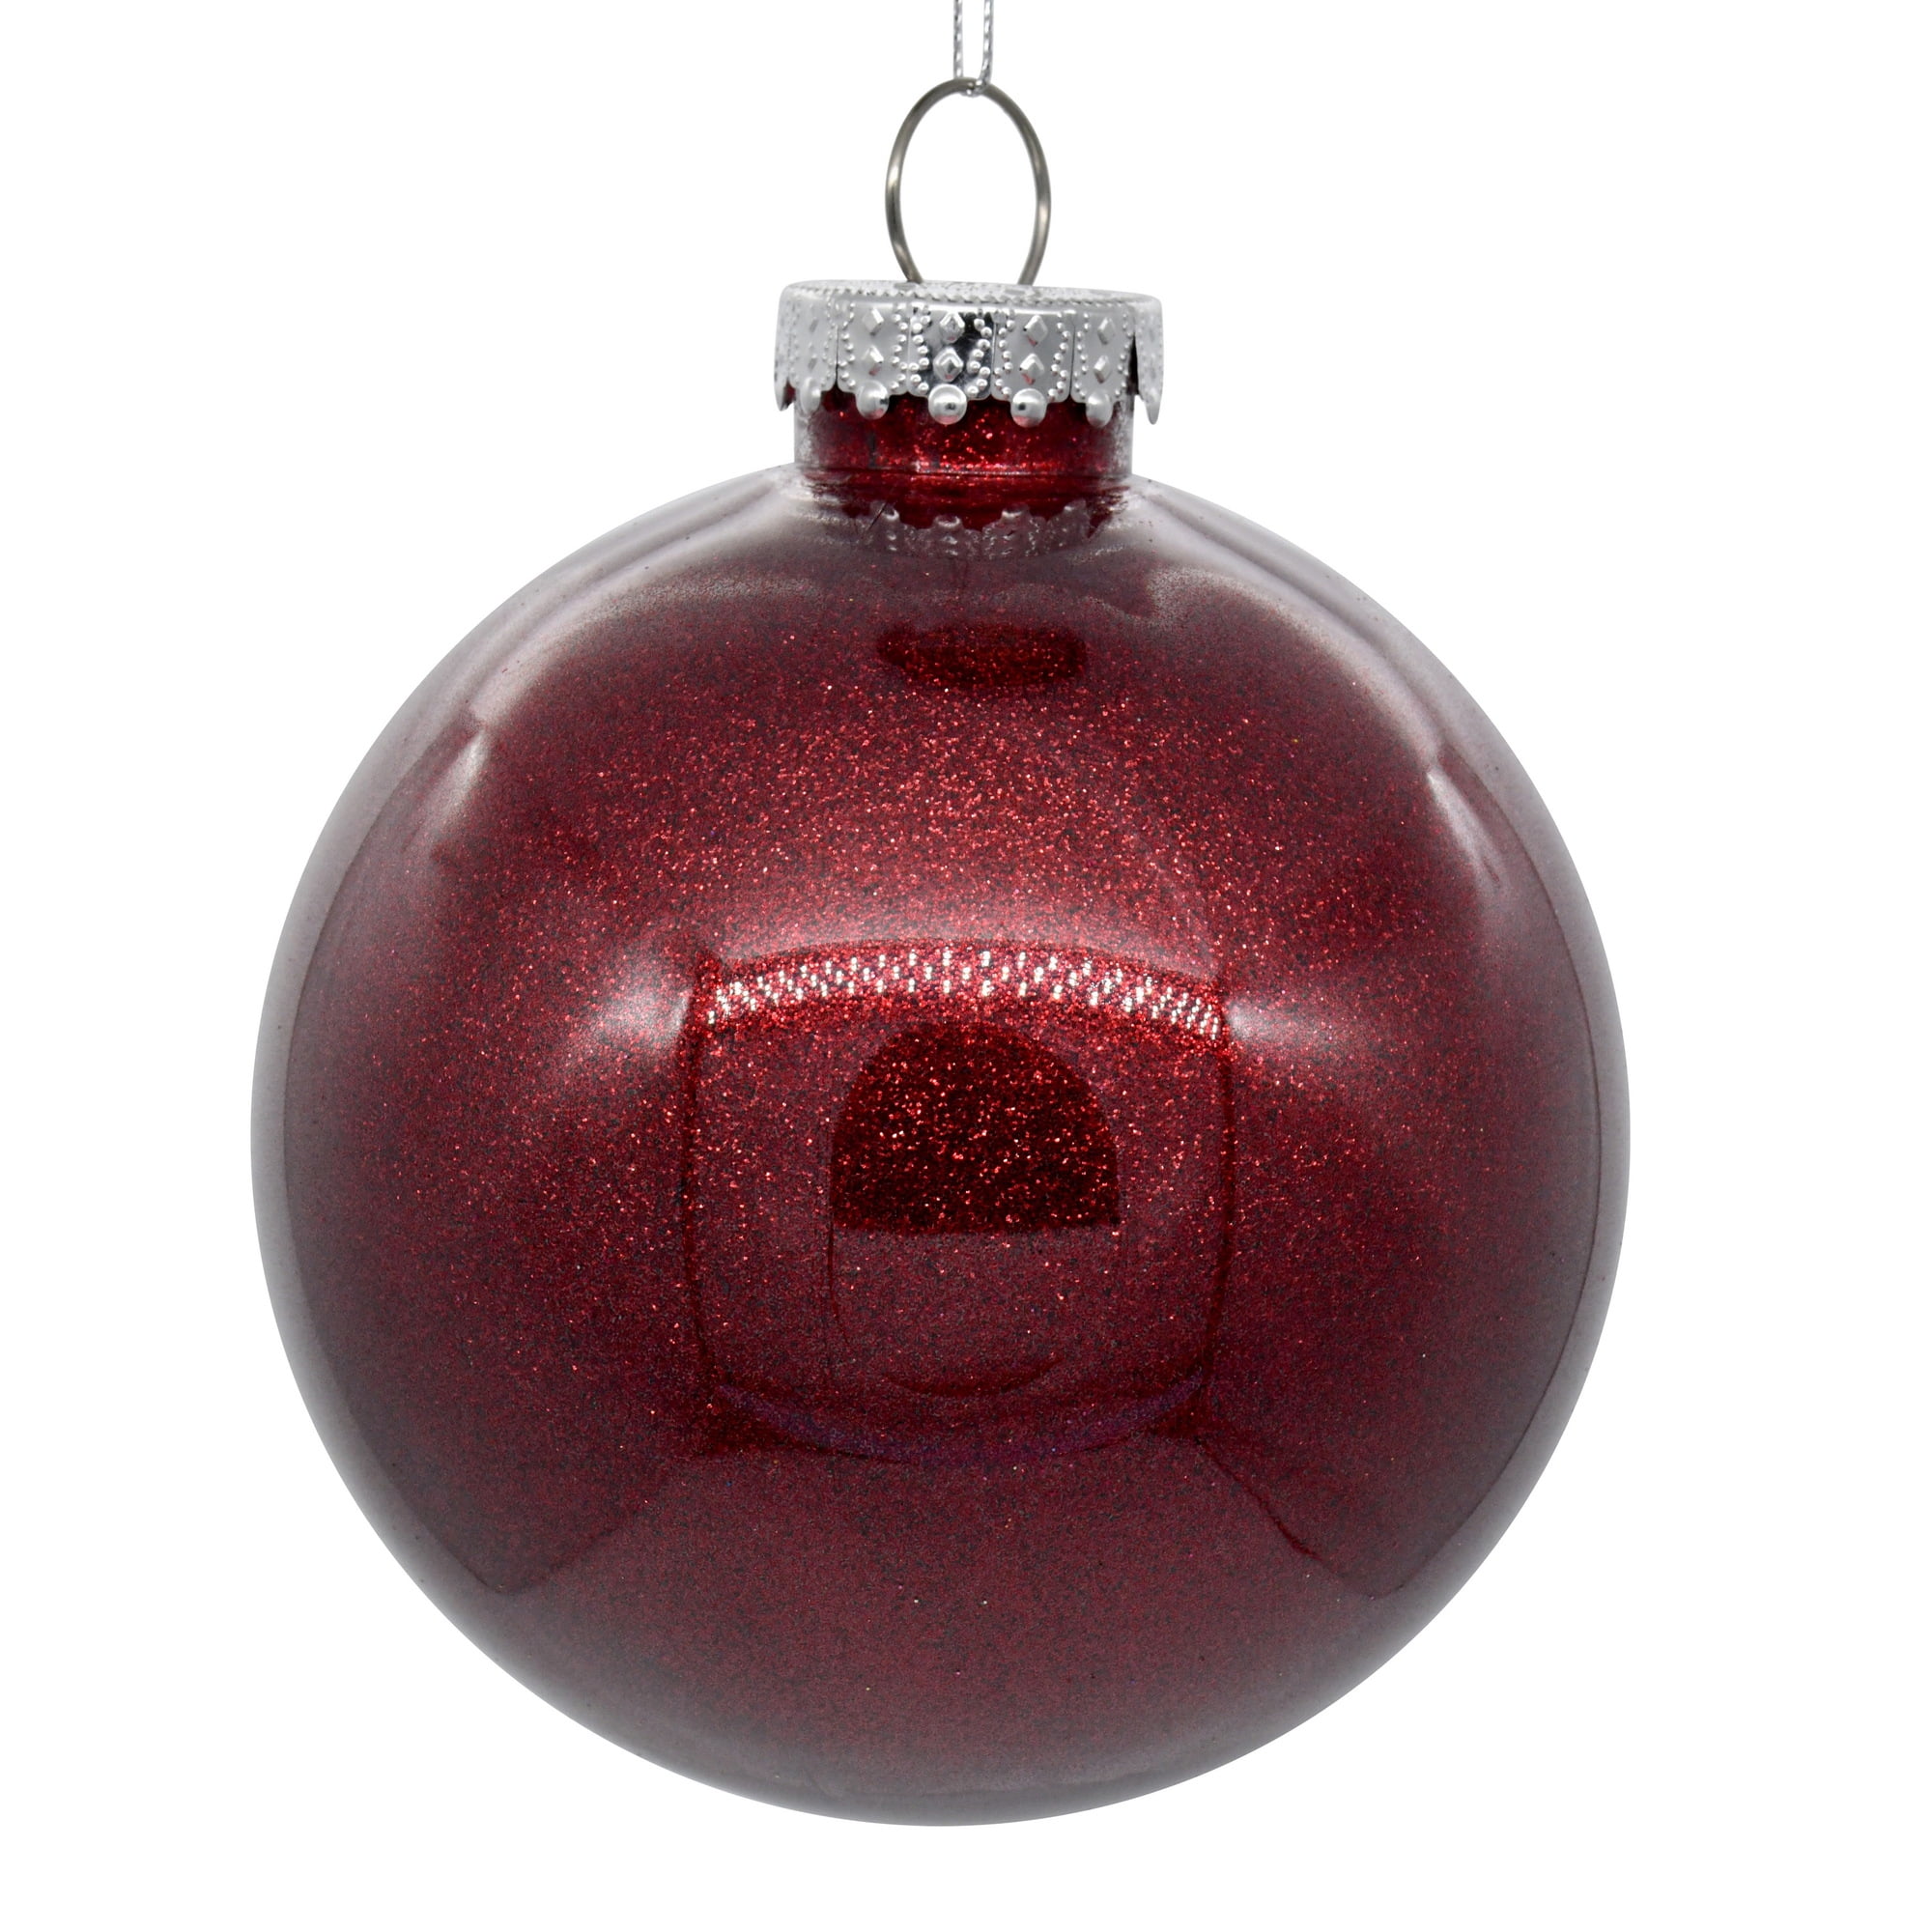 Celebrate It 4 Piece Large Glass Ball Christmas Ornaments Charcoal Silver 2.6" 